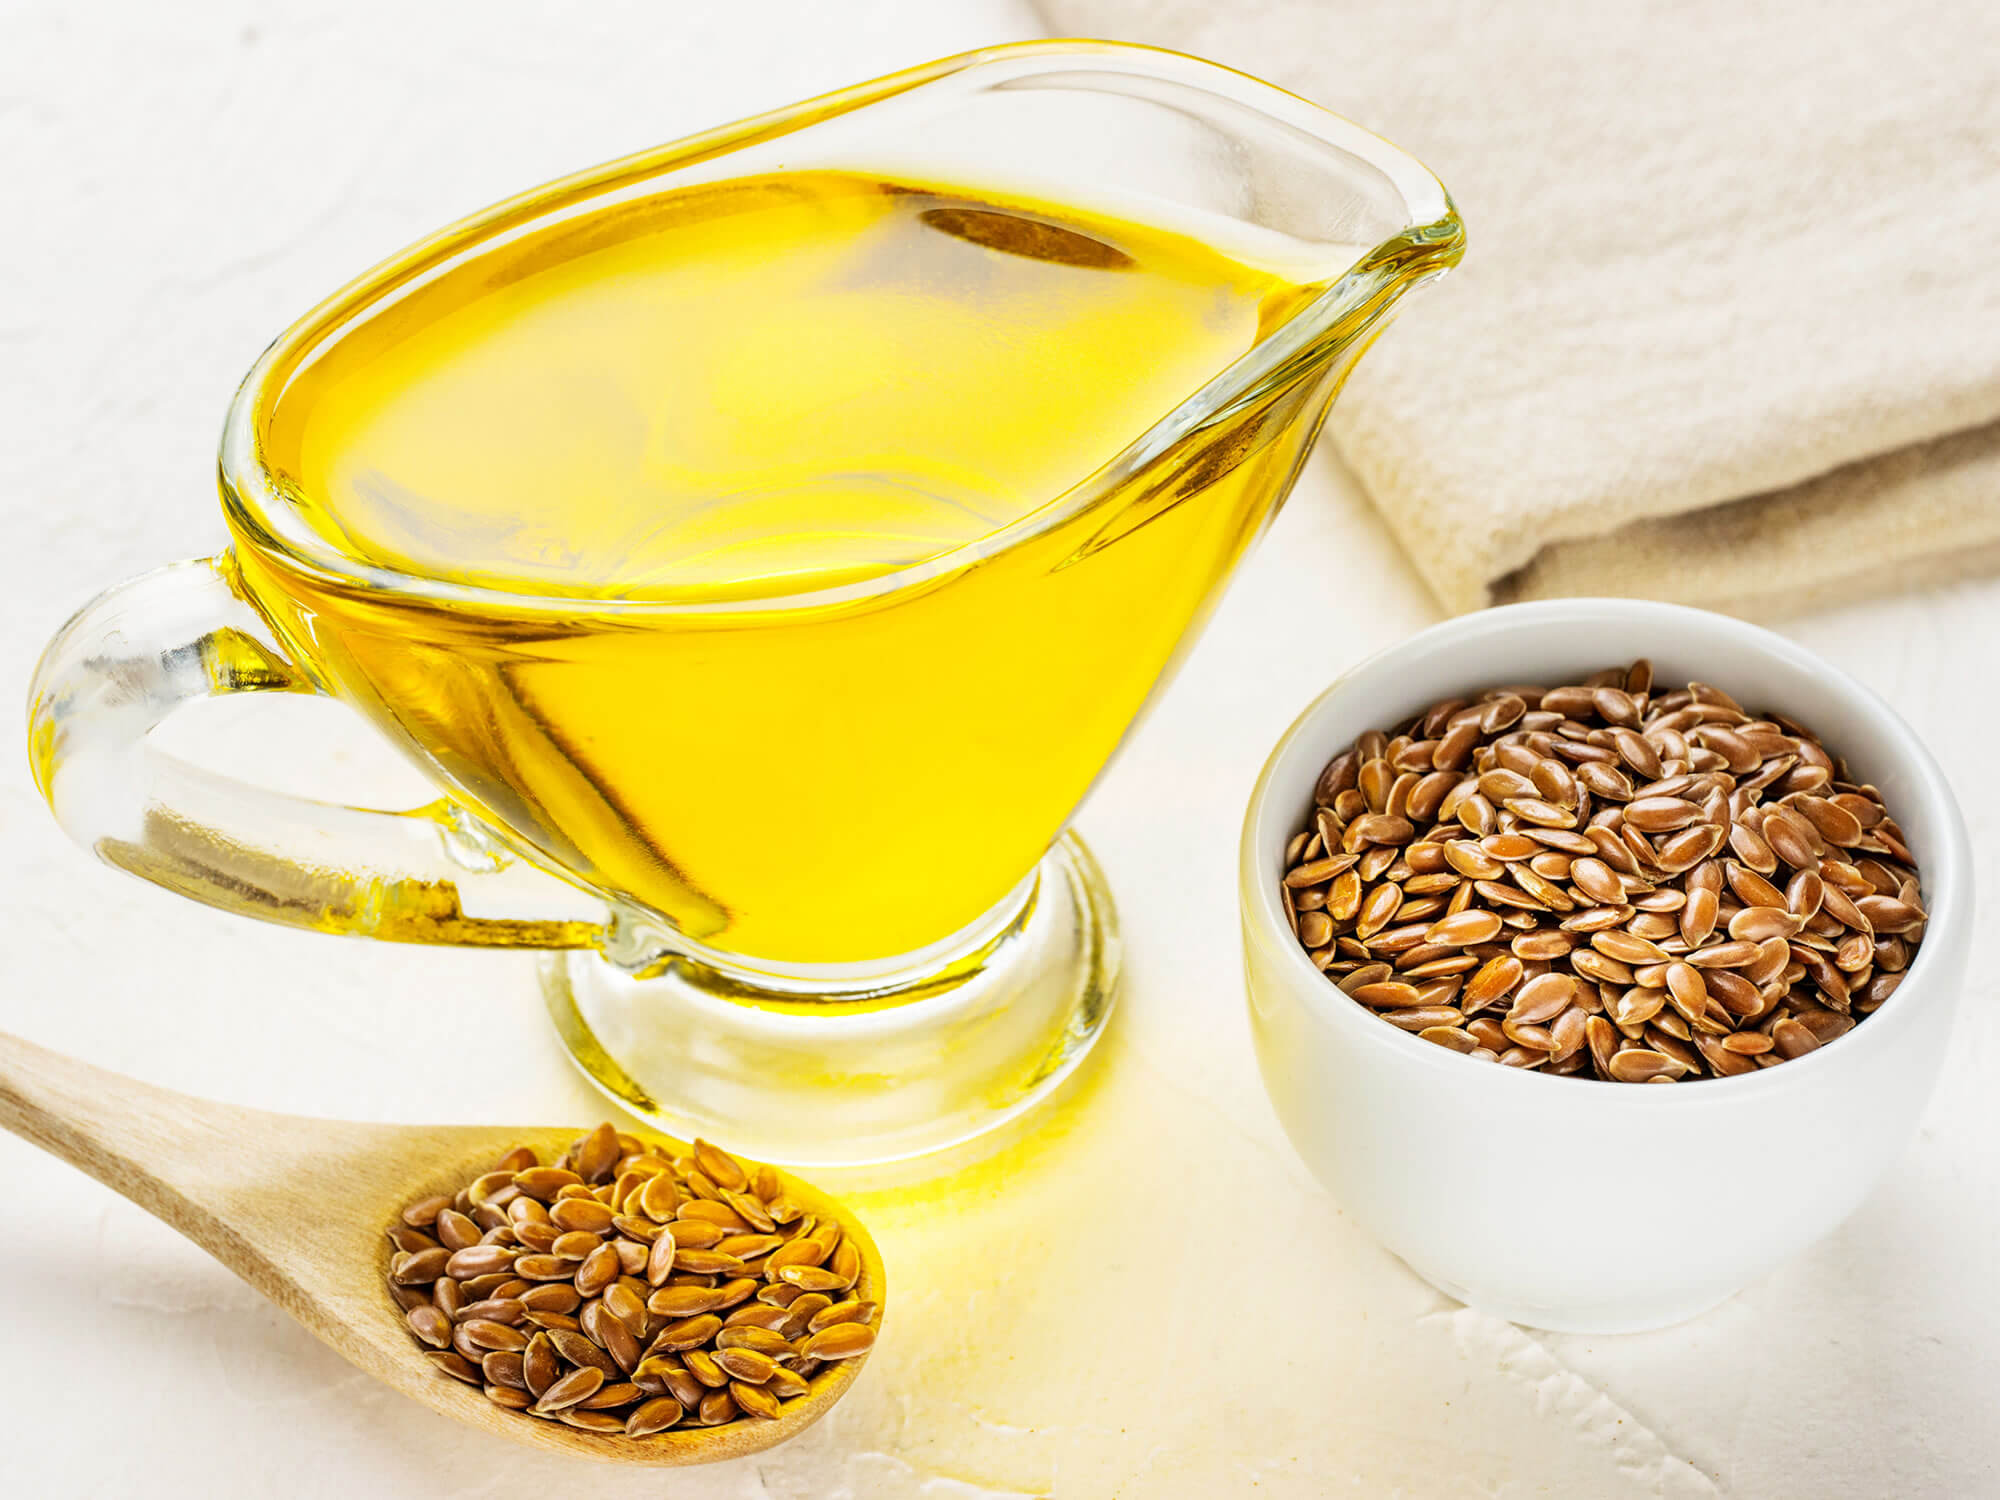 Cold liver oil and Flaxseed oil